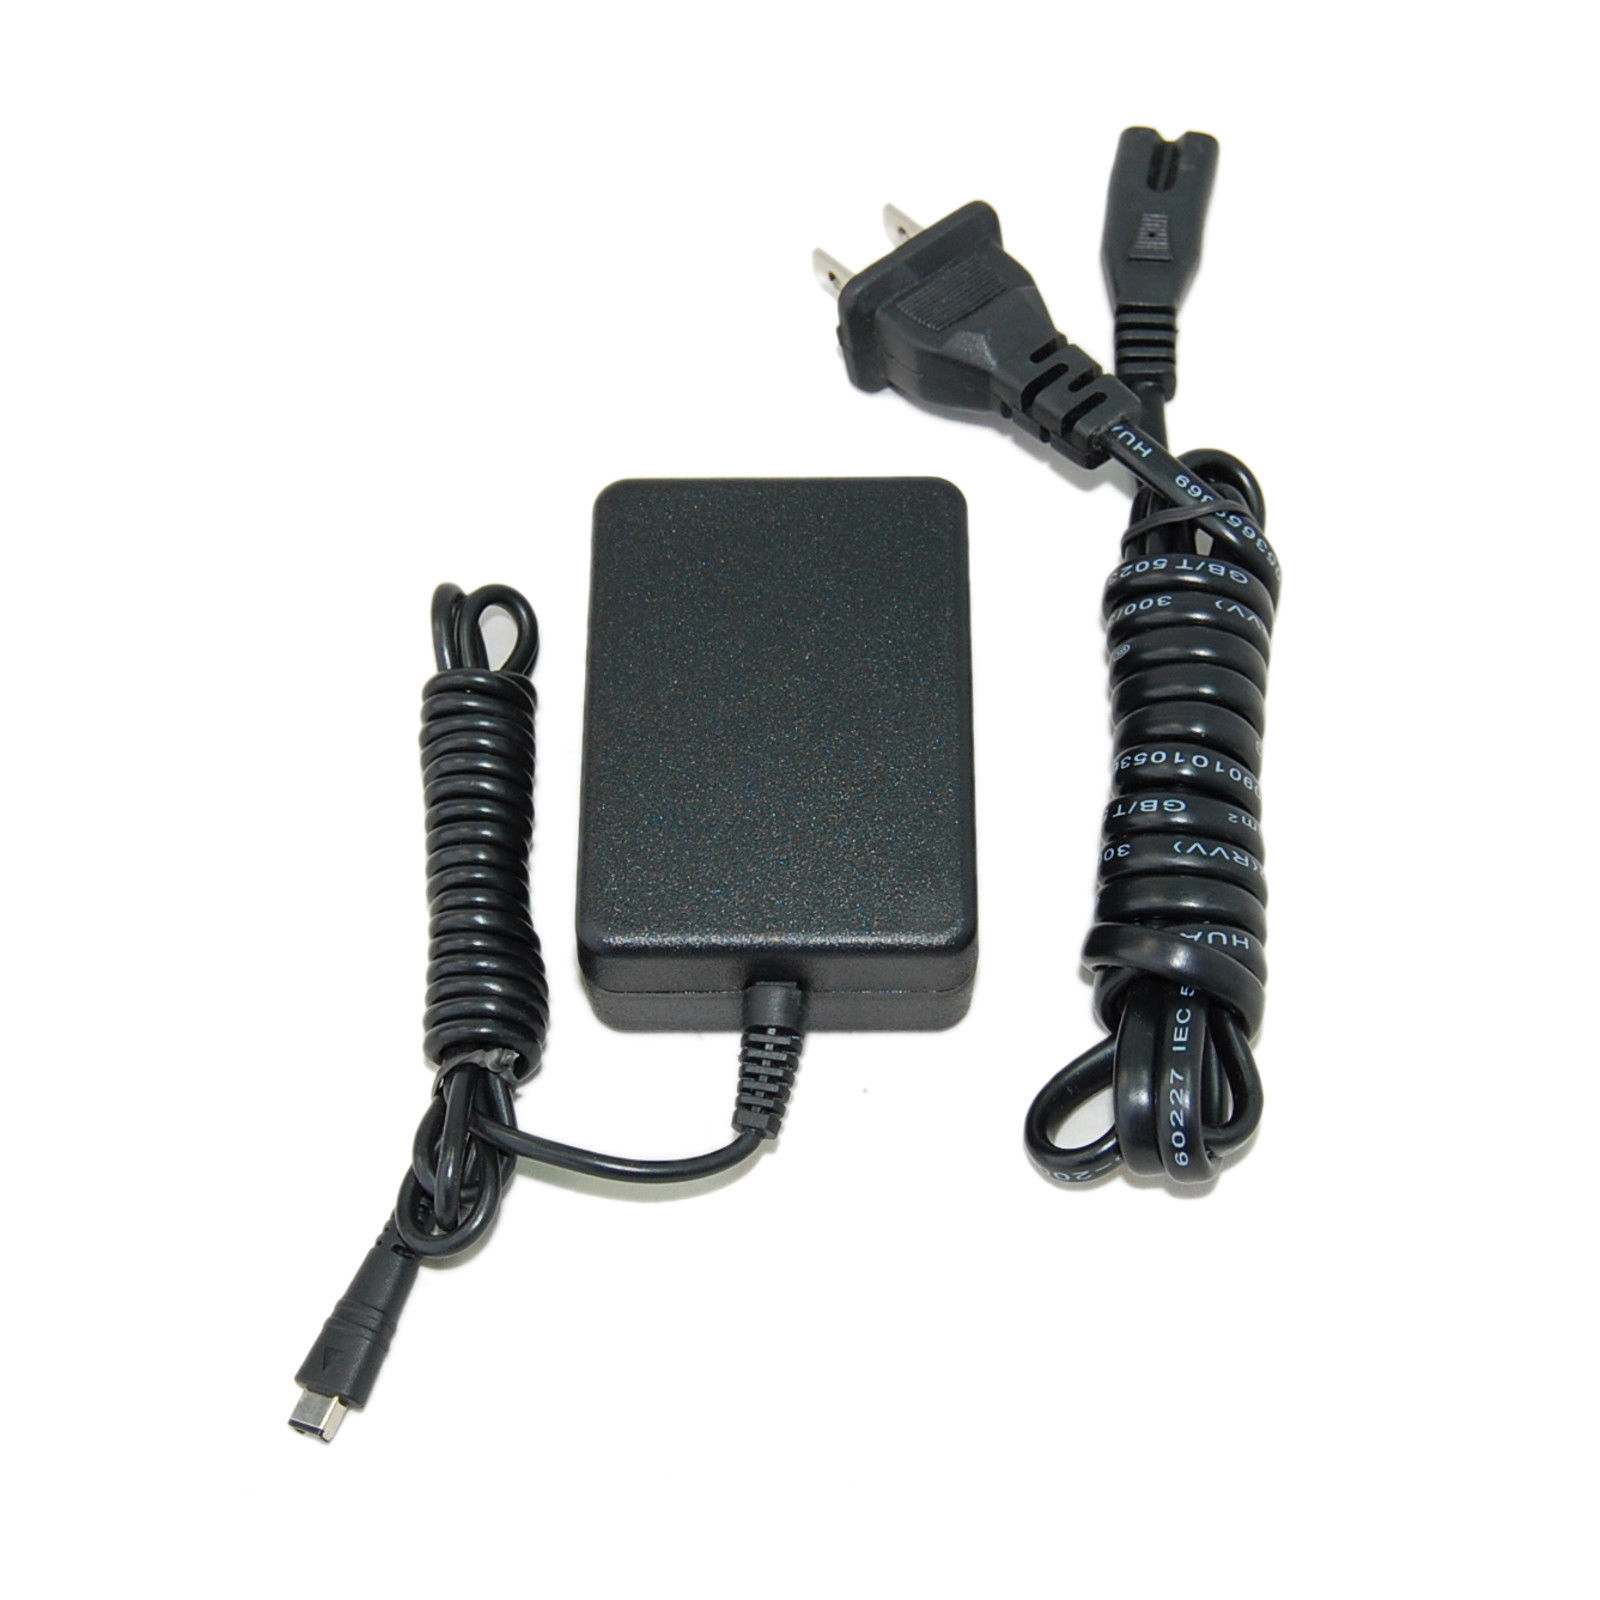 HQRP AC Power Adapter Charger for Canon VIXIA HF R20, HF R21, HF R200 Camcorder